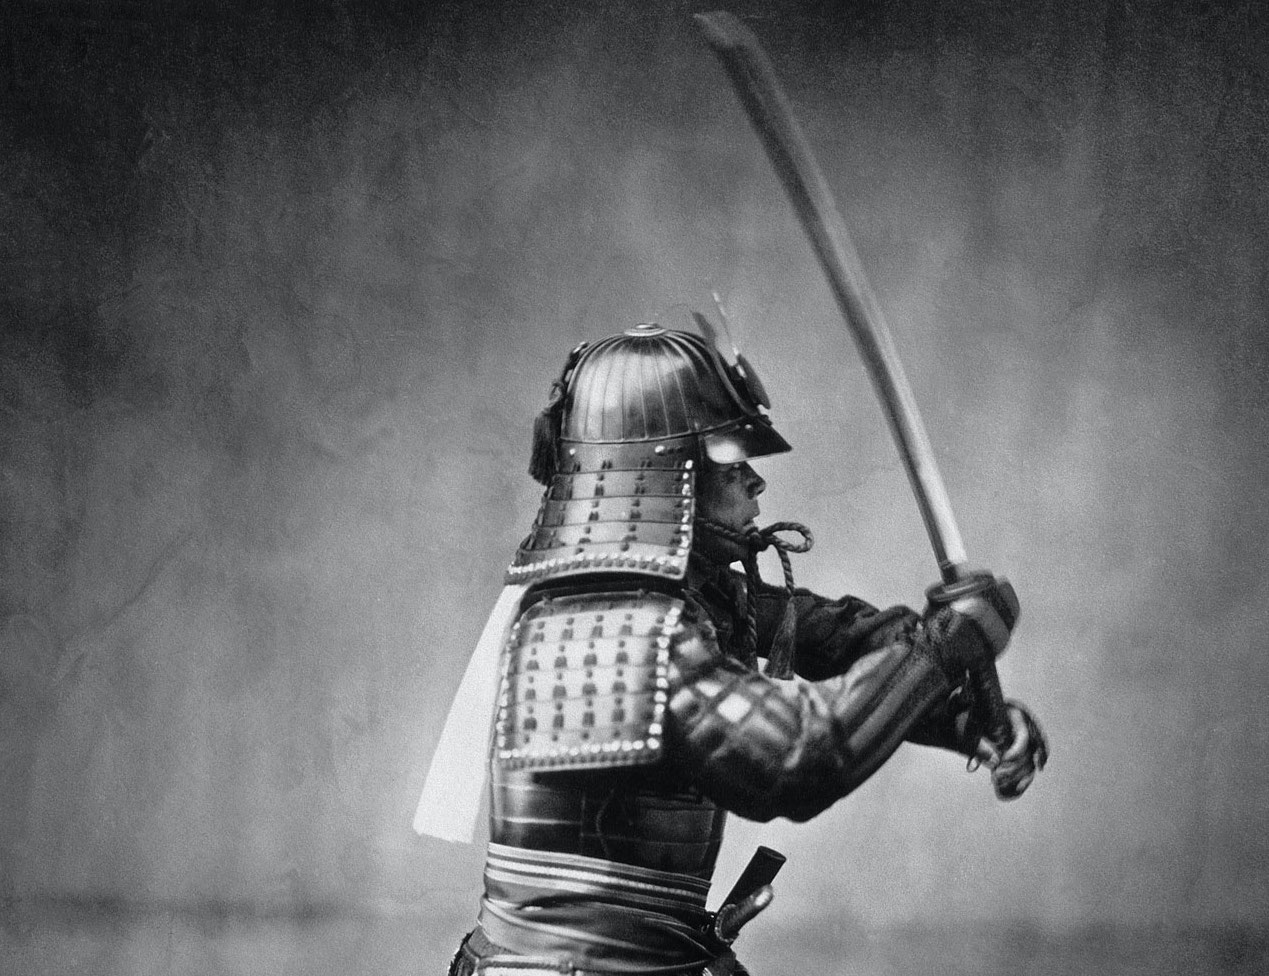 This is the fascinating process of how samurai swords are made